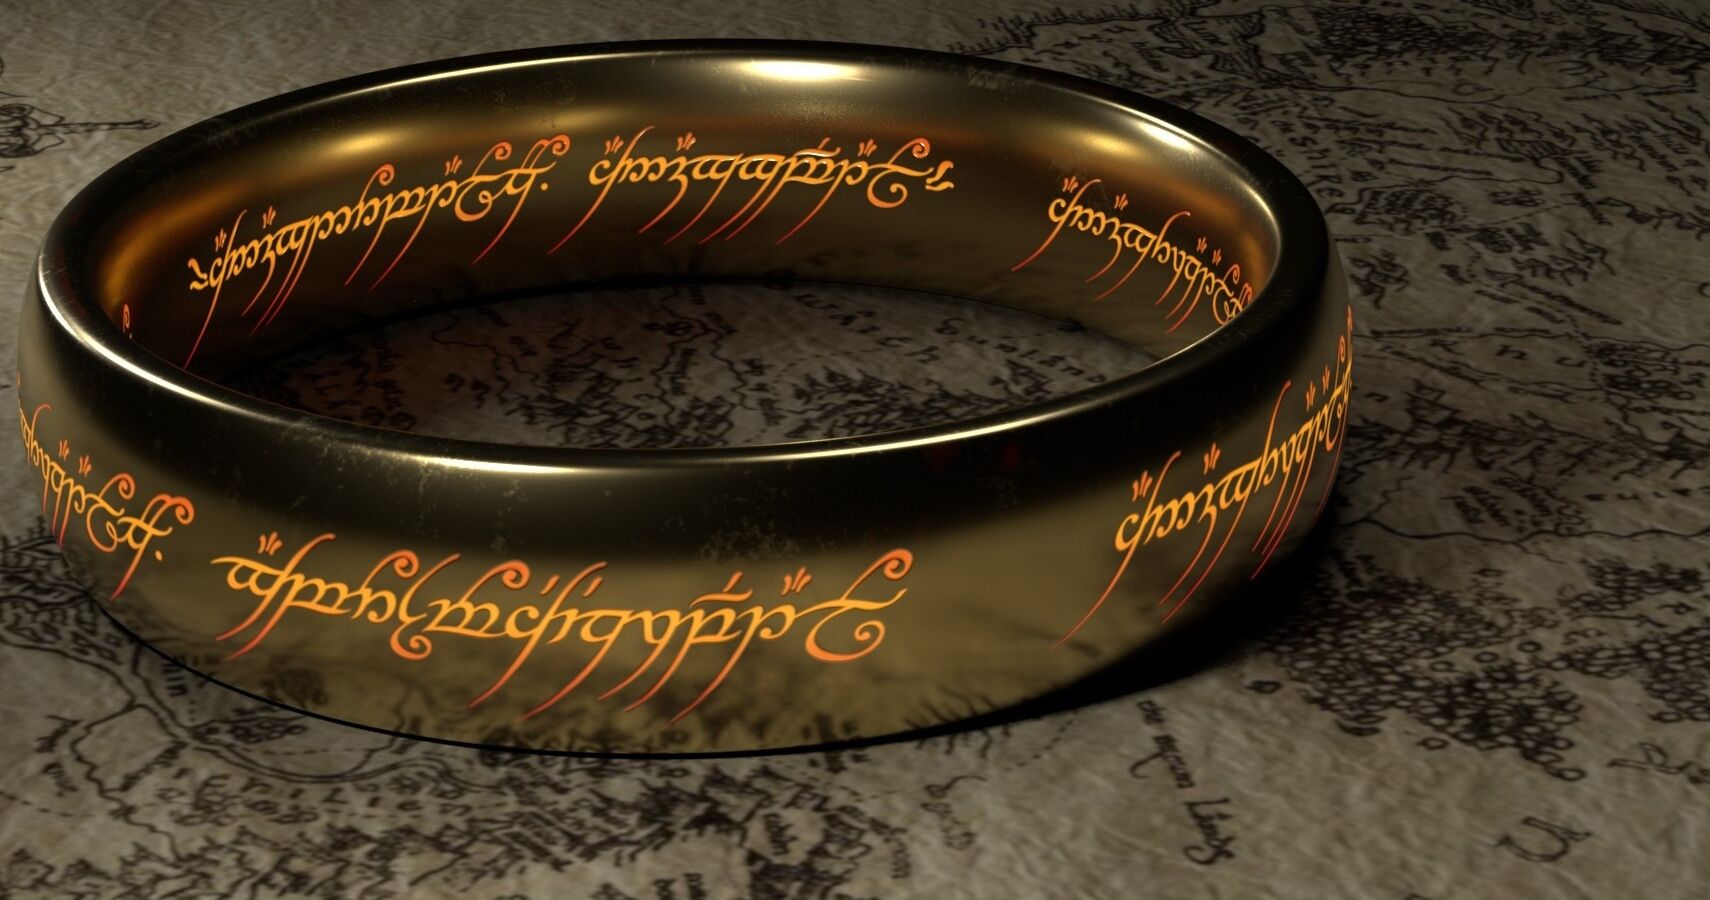 In The Lord of the Rings who wrote the verse about the rings? - Quora